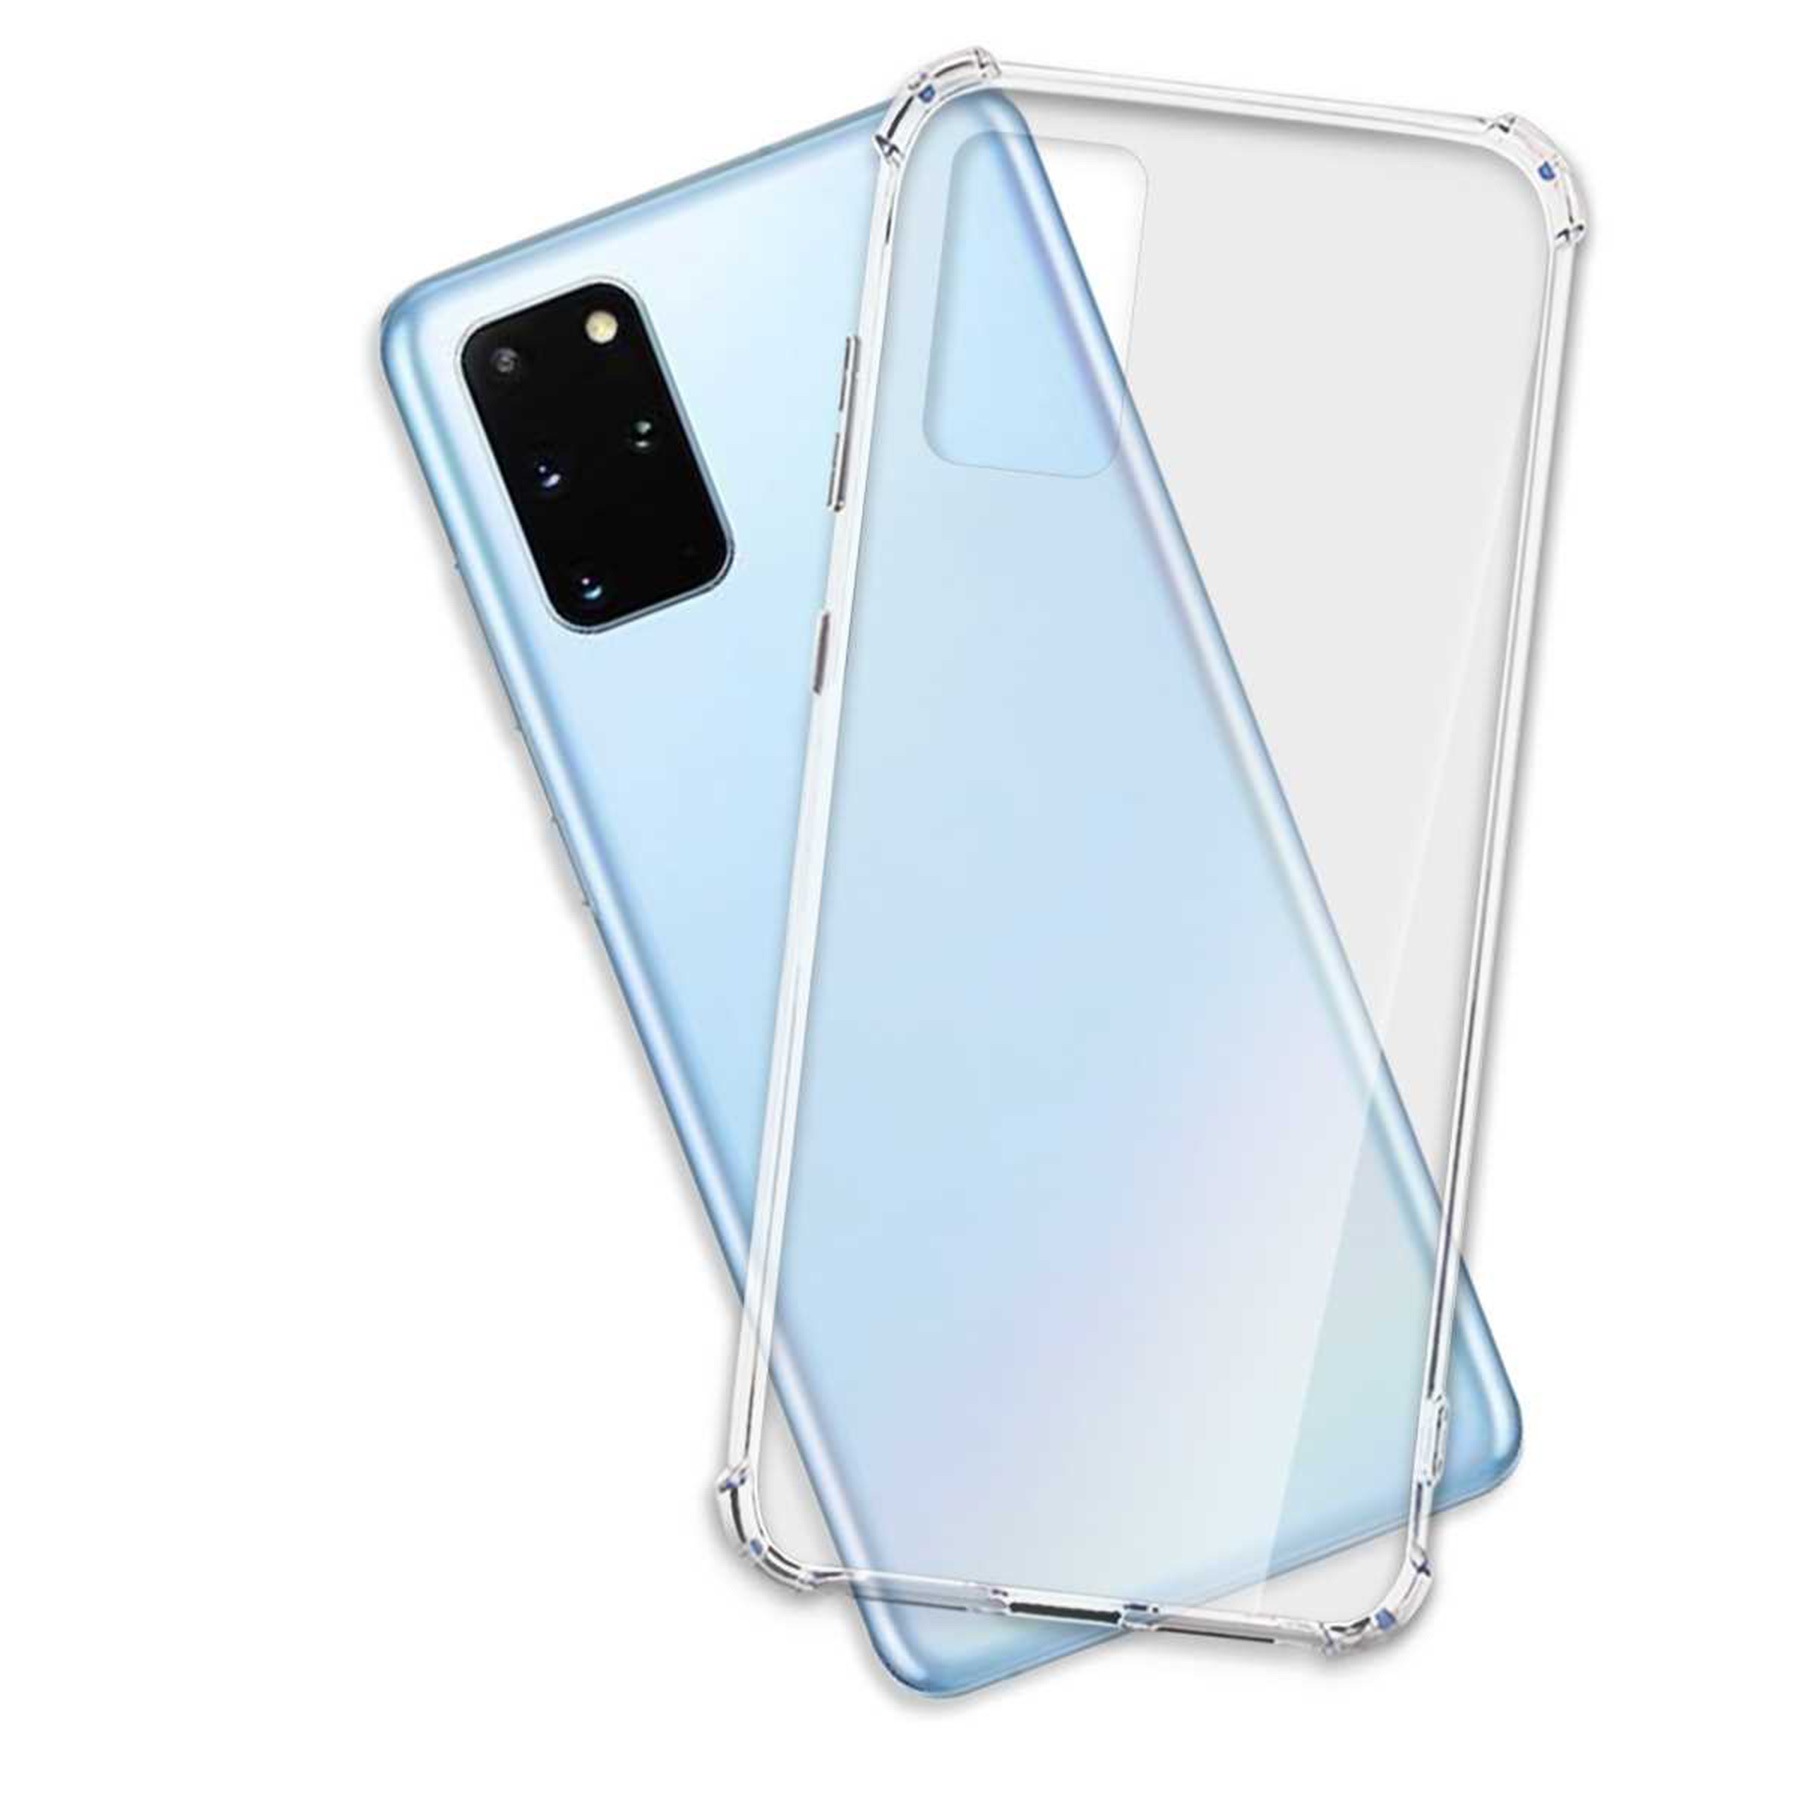 S20 Case, Armor Samsung, ENERGY Plus, Clear MTB Galaxy Transparent Backcover, MORE